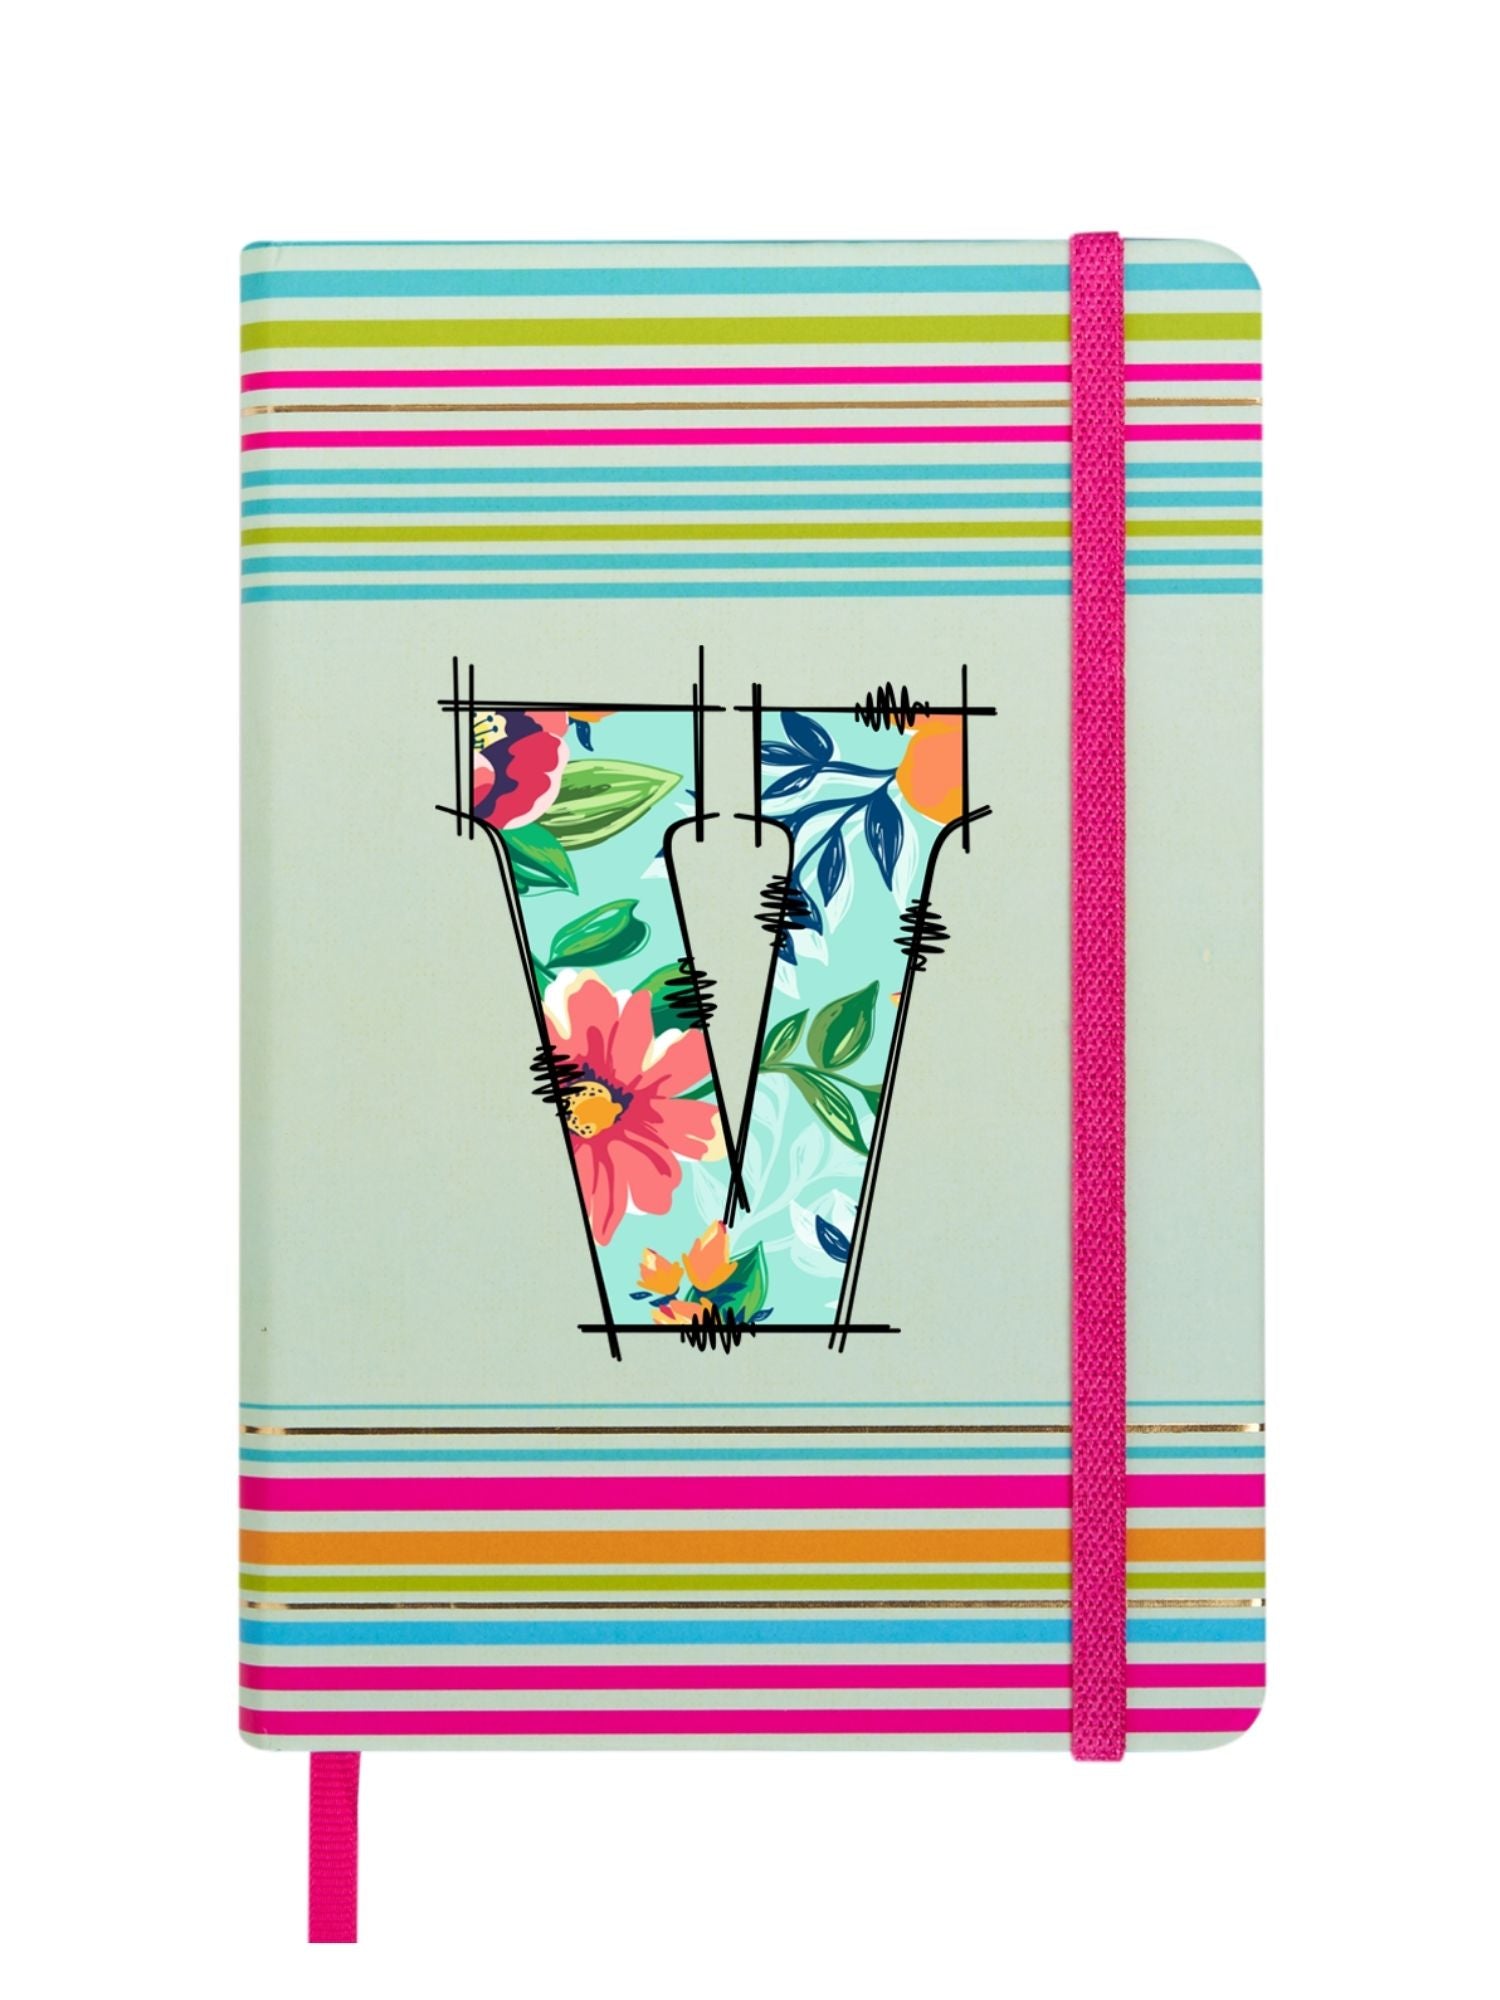 Doodle Initial V Stripes Theme Premium Hard Bound B6 Notebook Diary